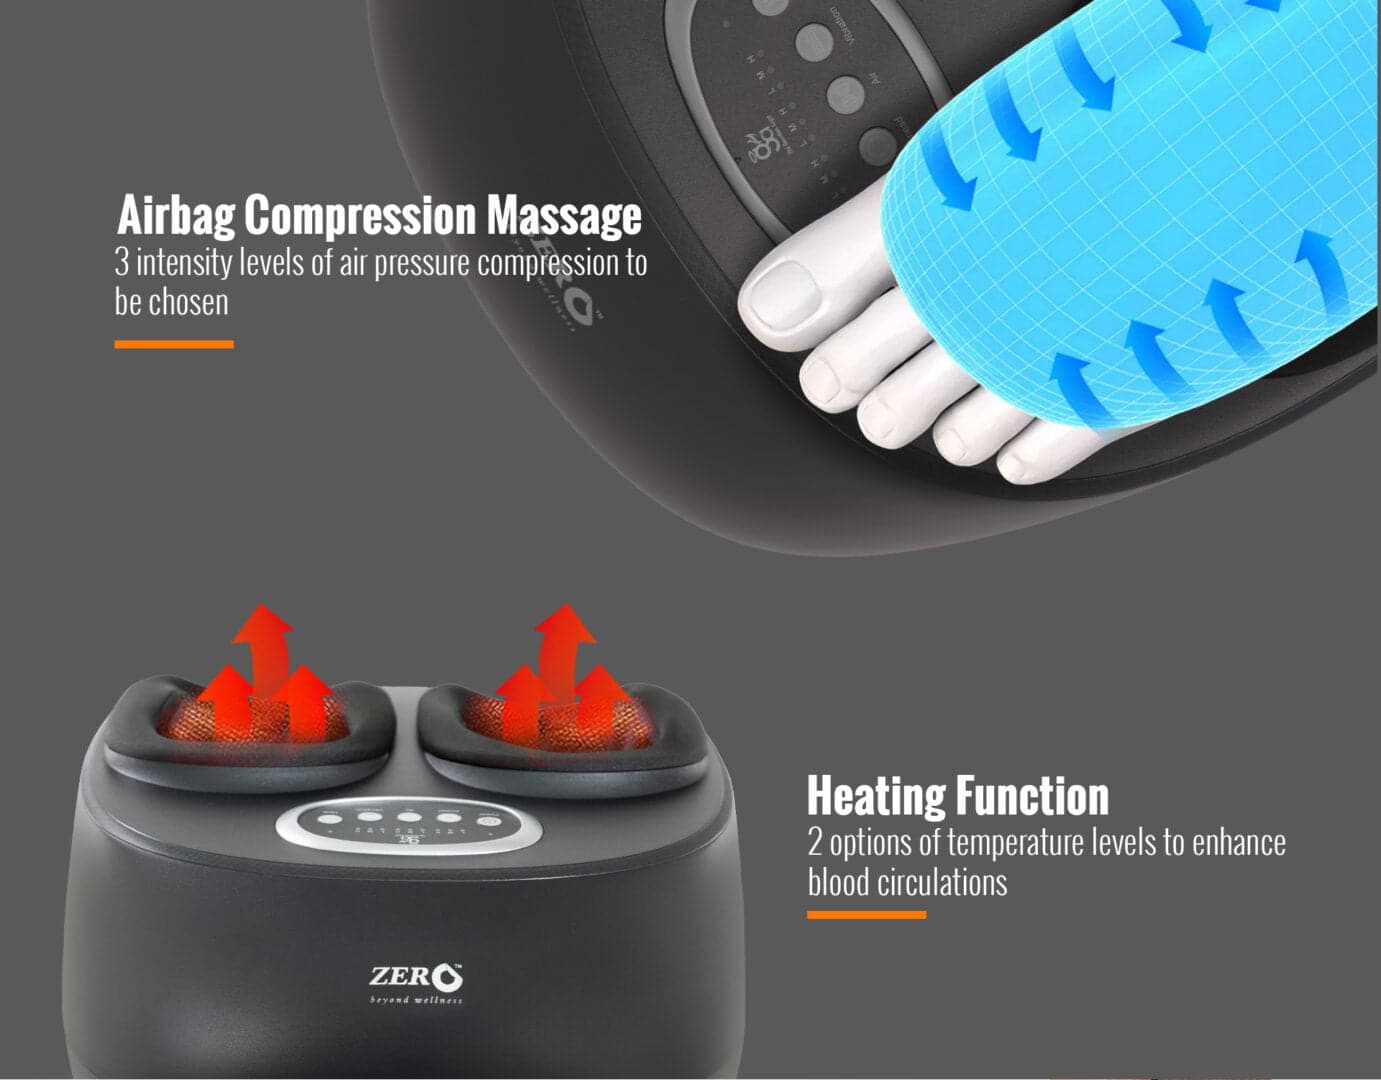 Zero HealthCare, The Guardian Angel Electric Foot Massager Machine - Athletix.ae